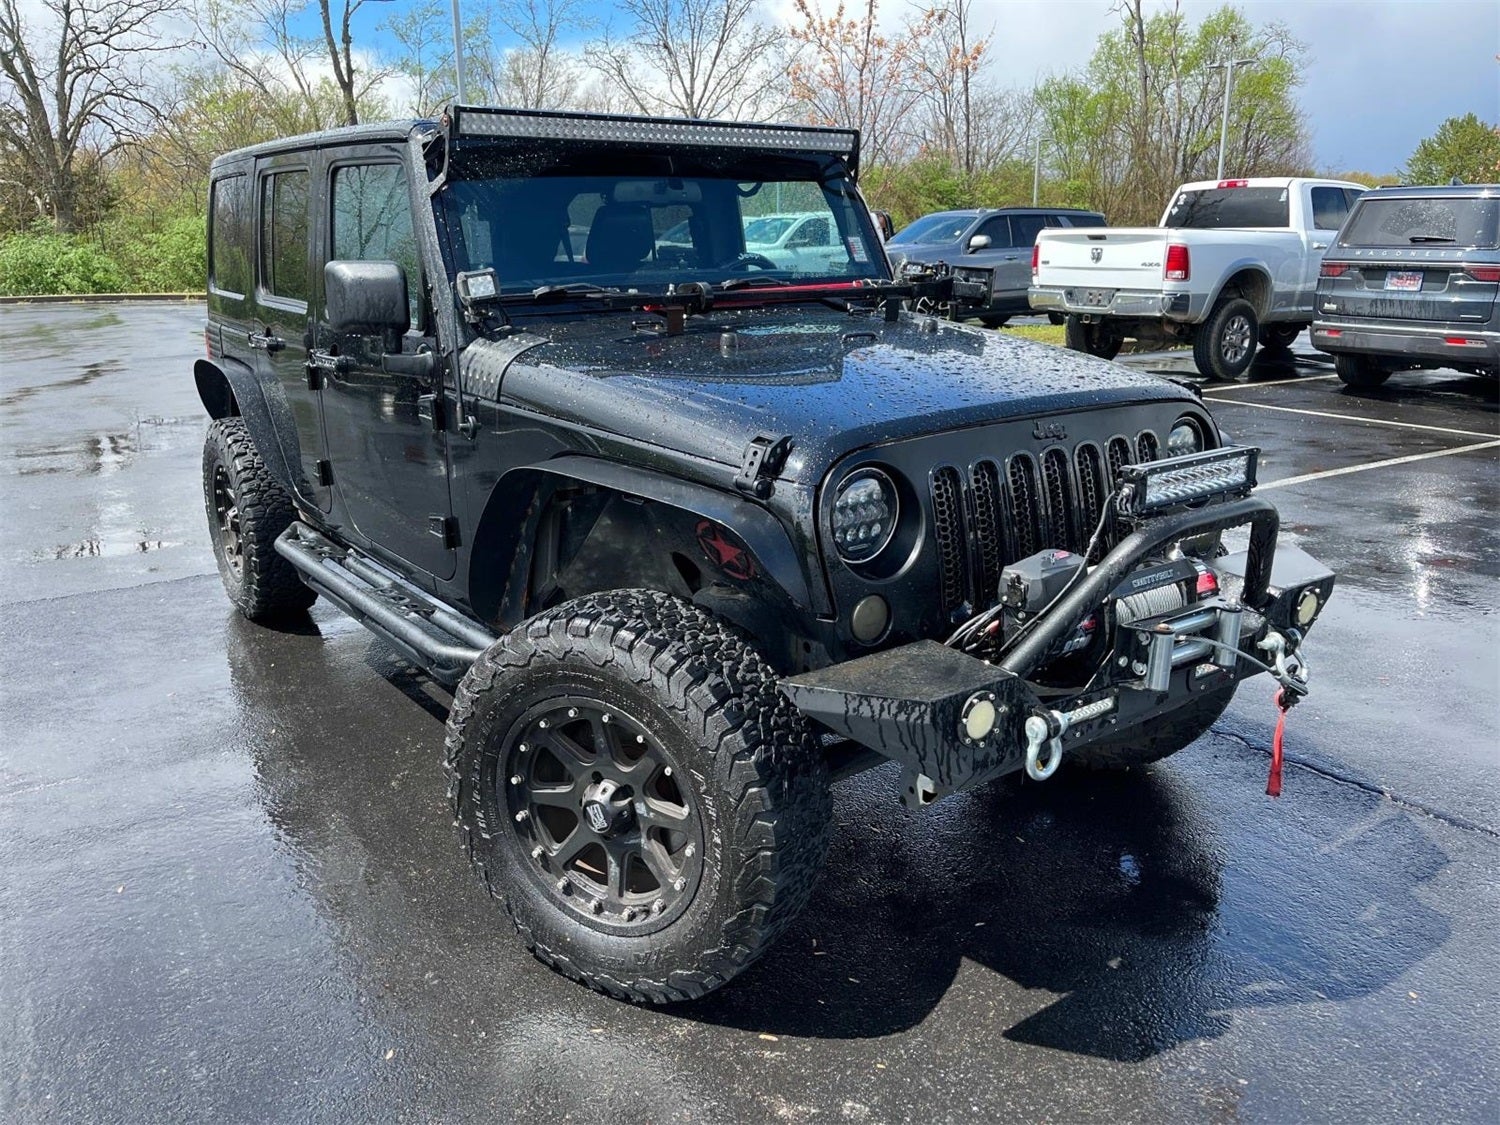 Used 2012 Jeep Wrangler Unlimited Sahara with VIN 1C4BJWEG6CL170235 for sale in Dickson, TN